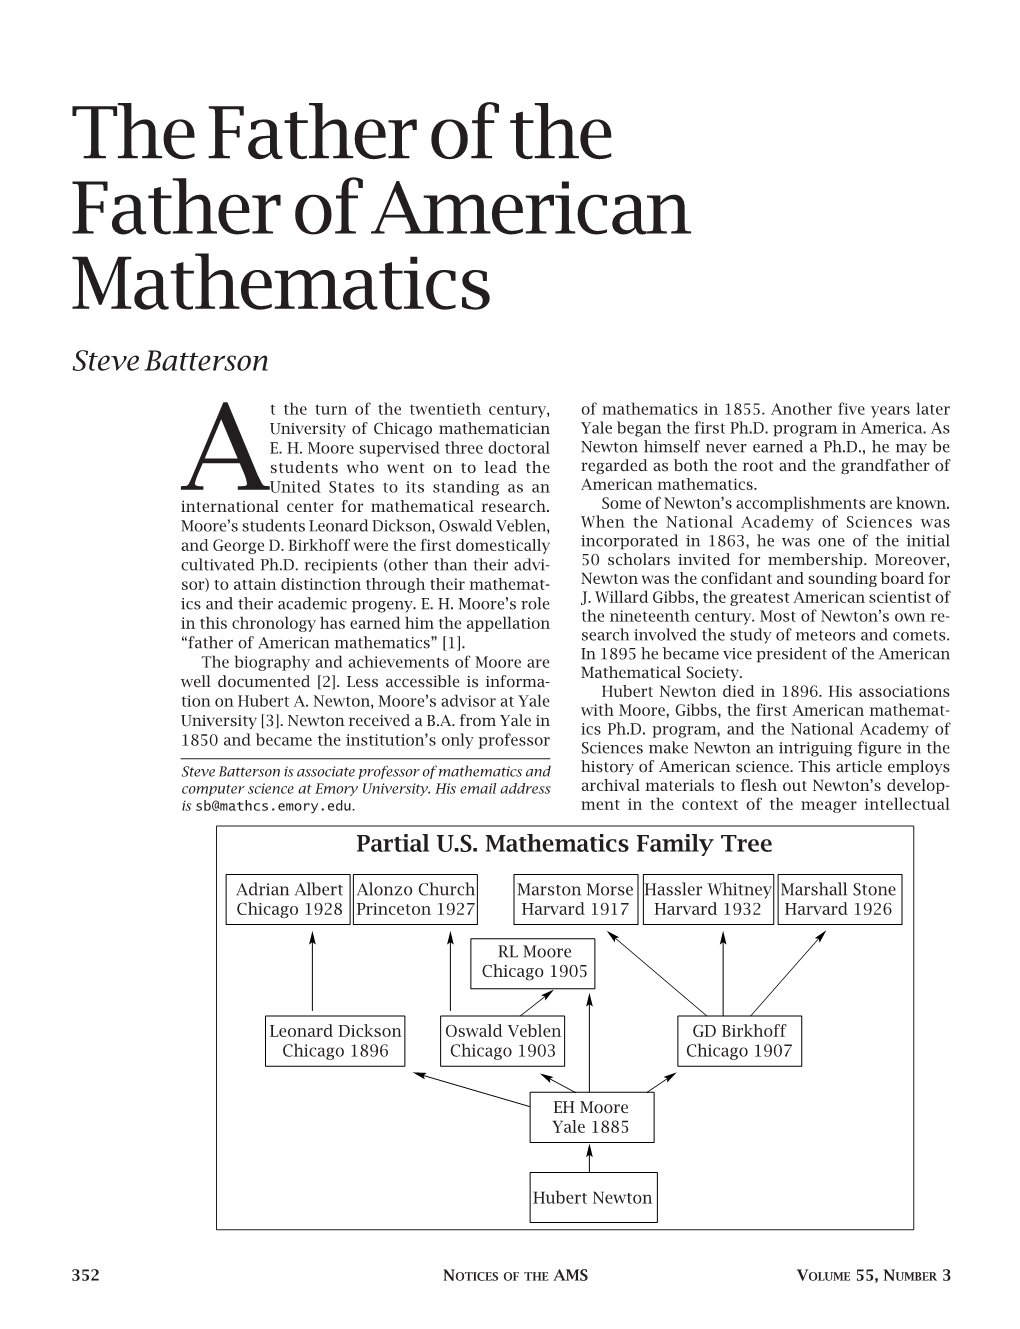 The Father of the Father of American Mathematics Steve Batterson